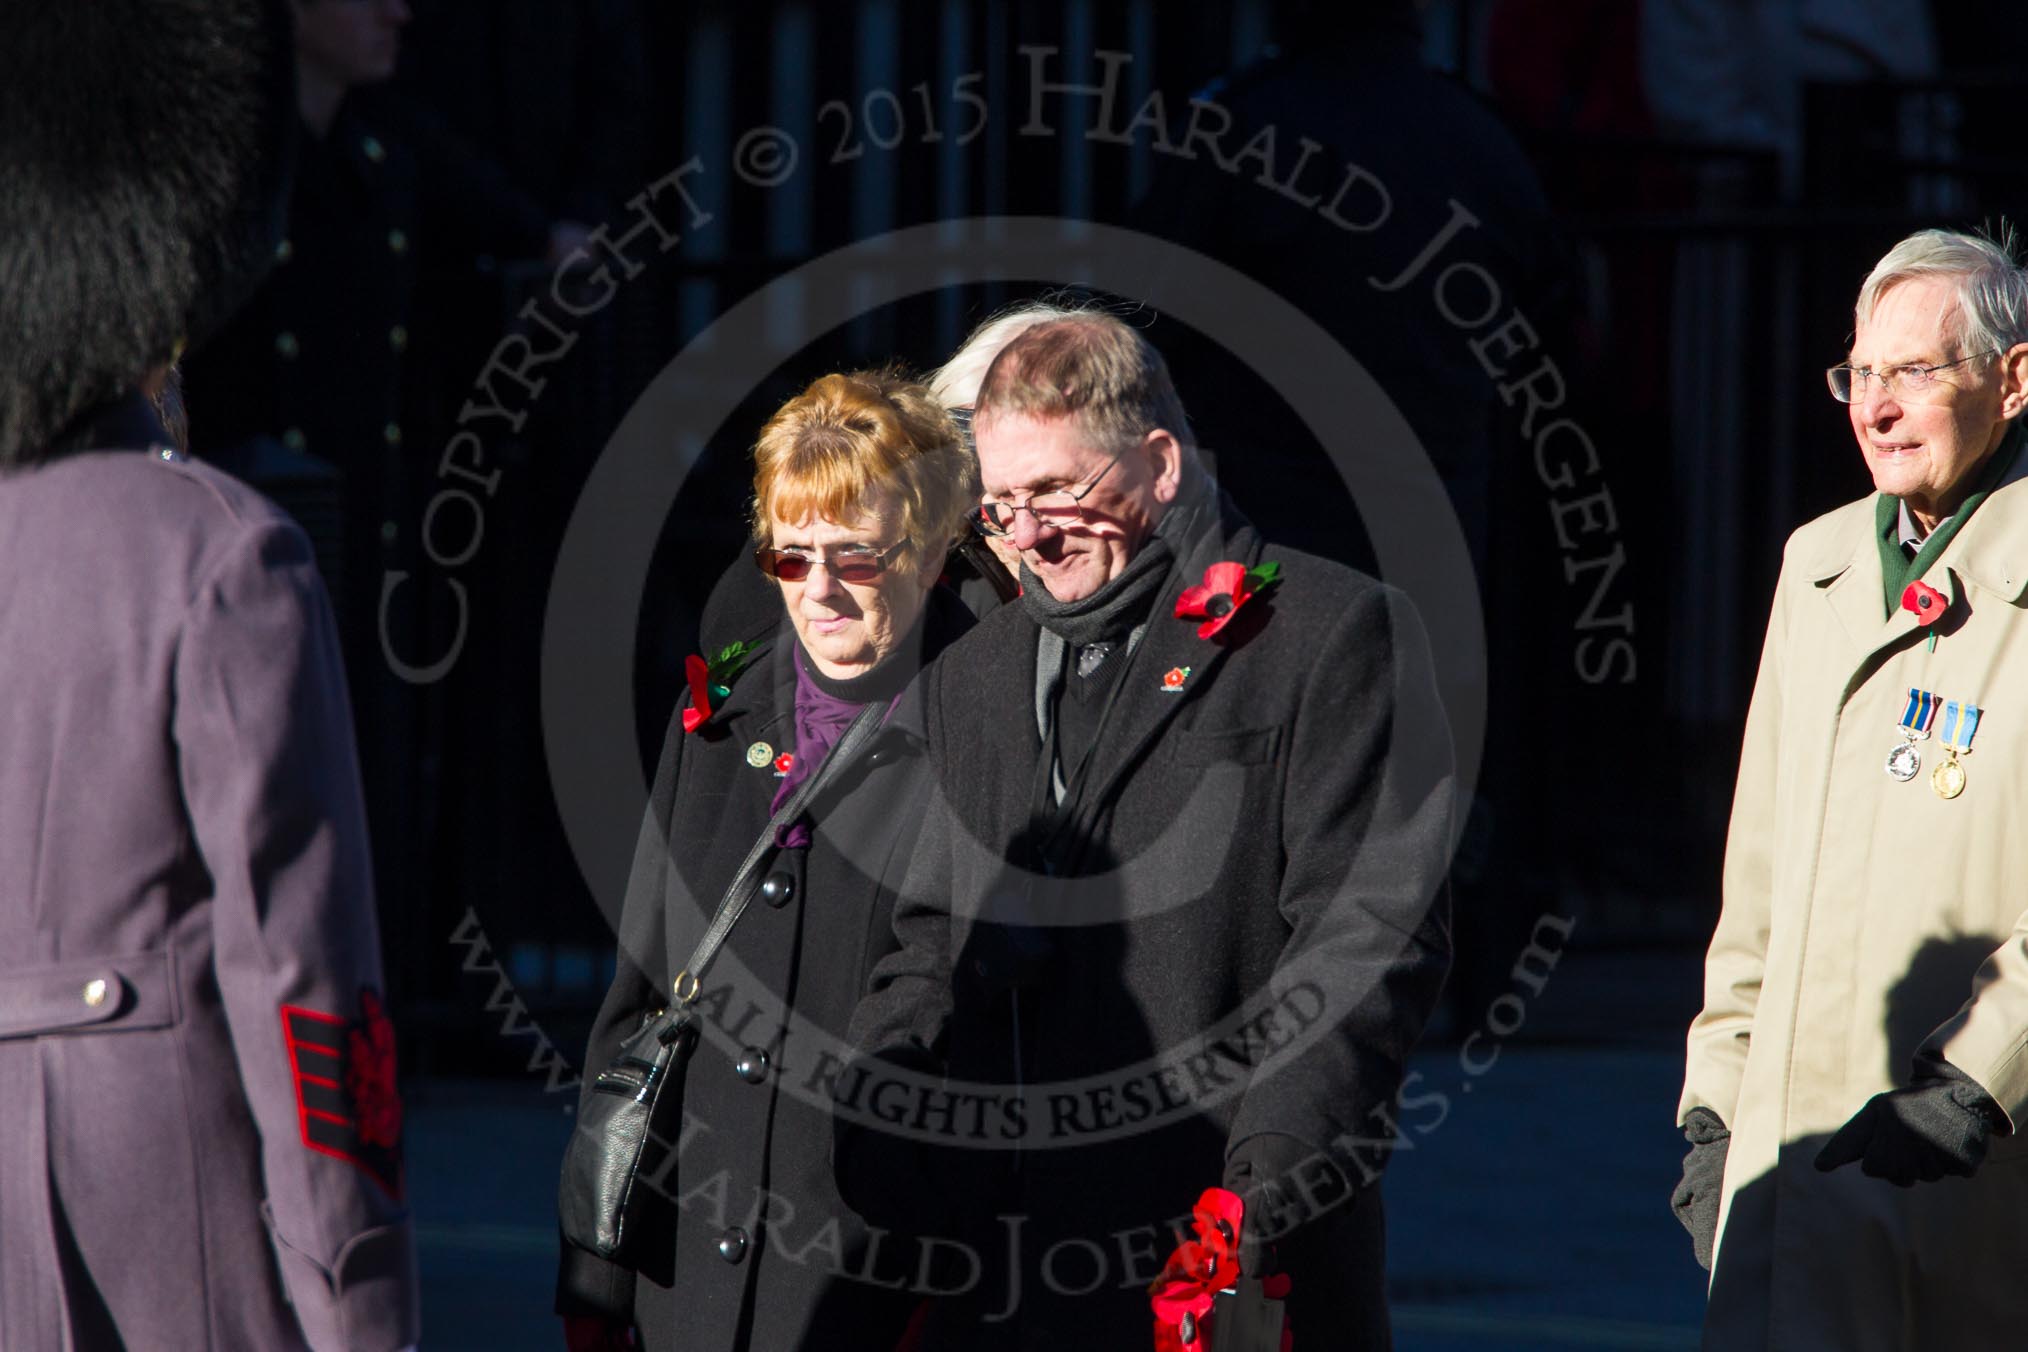 Remembrance Sunday Cenotaph March Past 2013: M37 - Shot at Dawn Pardons Campaign..
Press stand opposite the Foreign Office building, Whitehall, London SW1,
London,
Greater London,
United Kingdom,
on 10 November 2013 at 12:14, image #2155